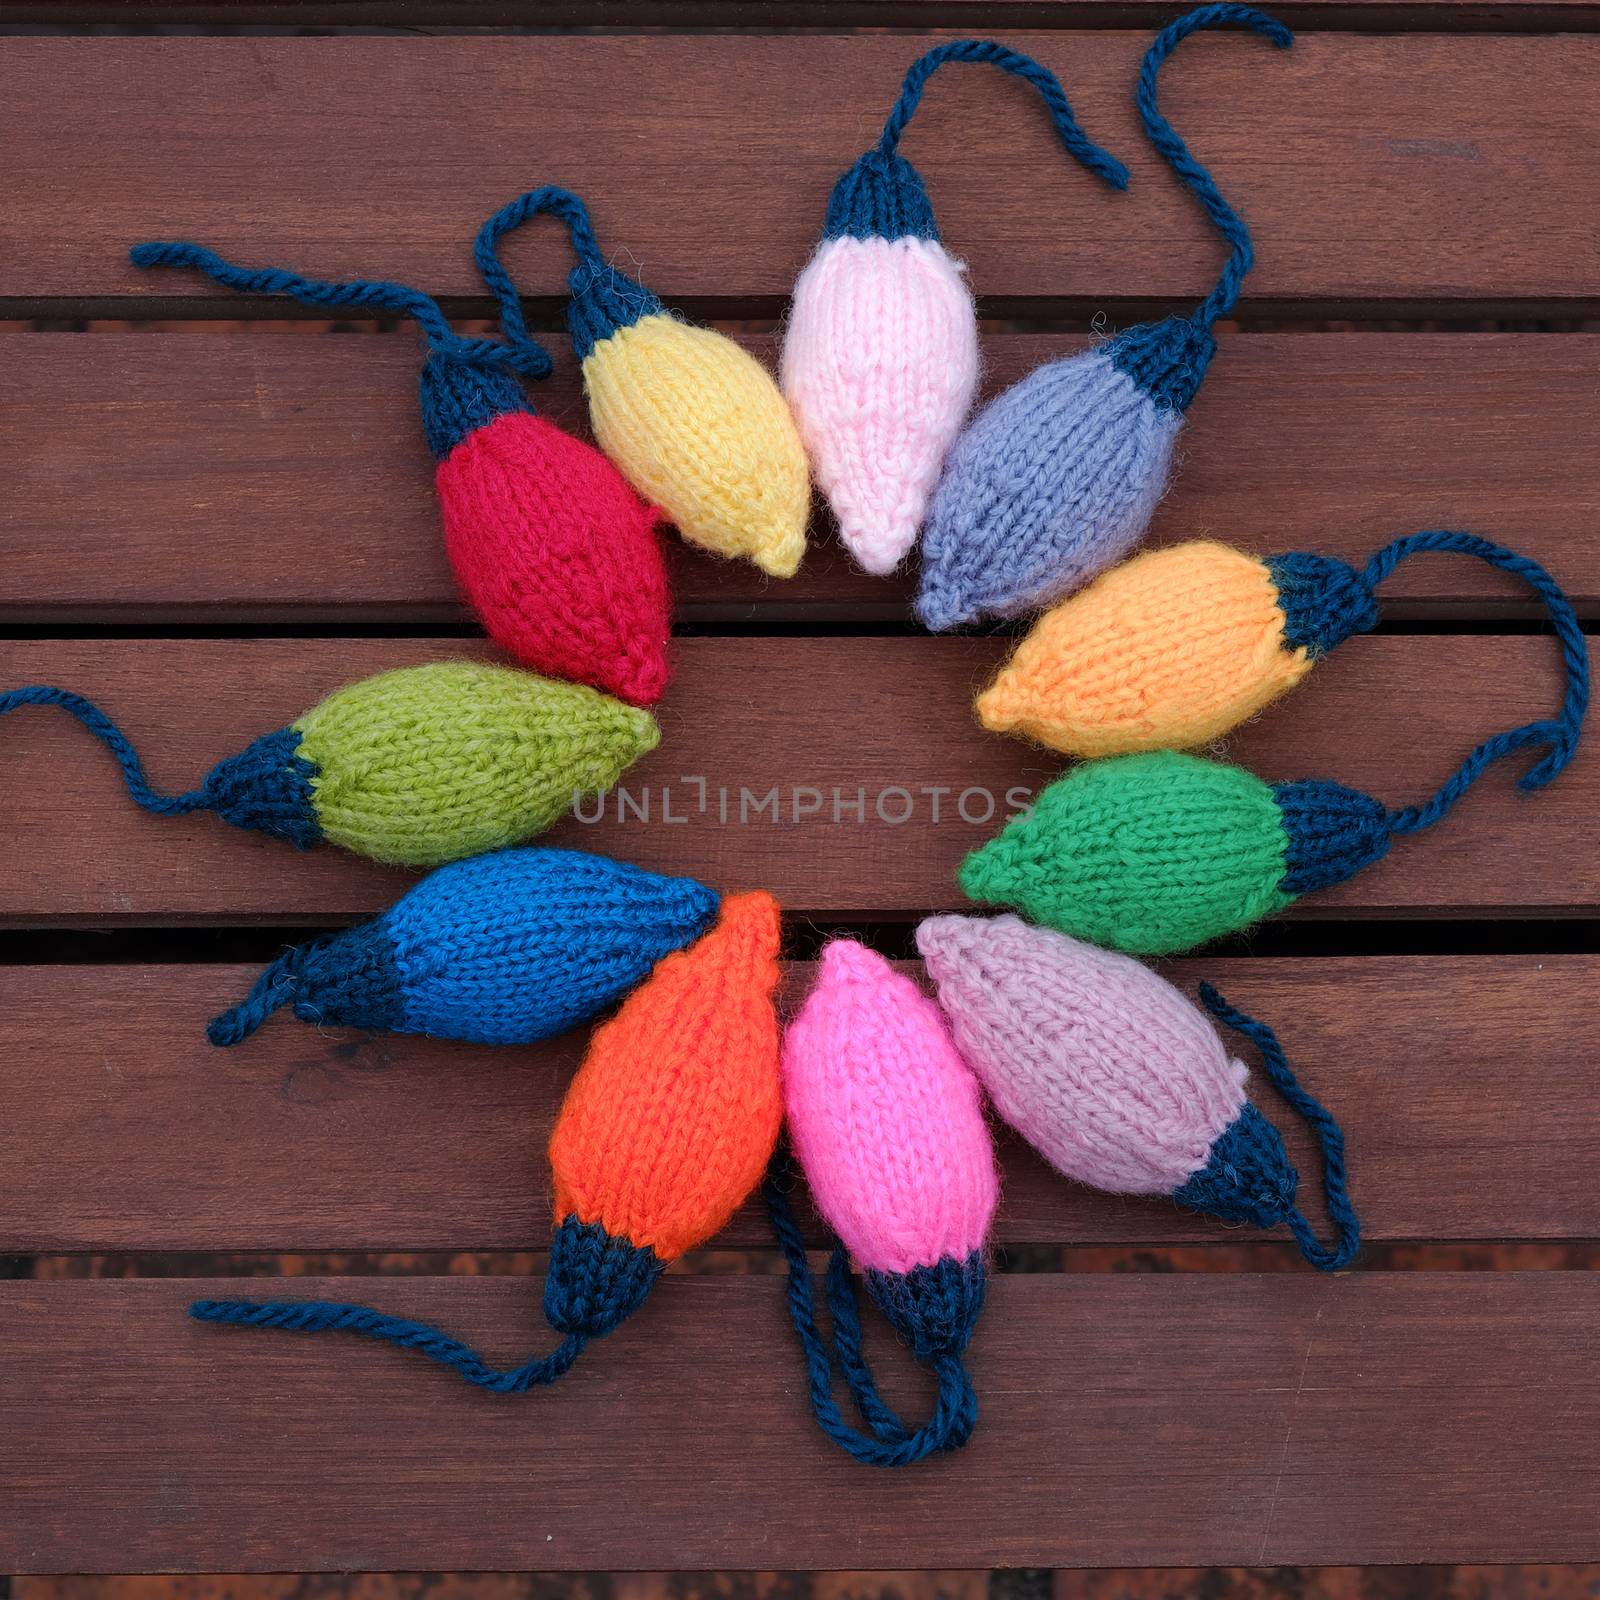 Xmas ornament, knitted Christmas lights by xuanhuongho